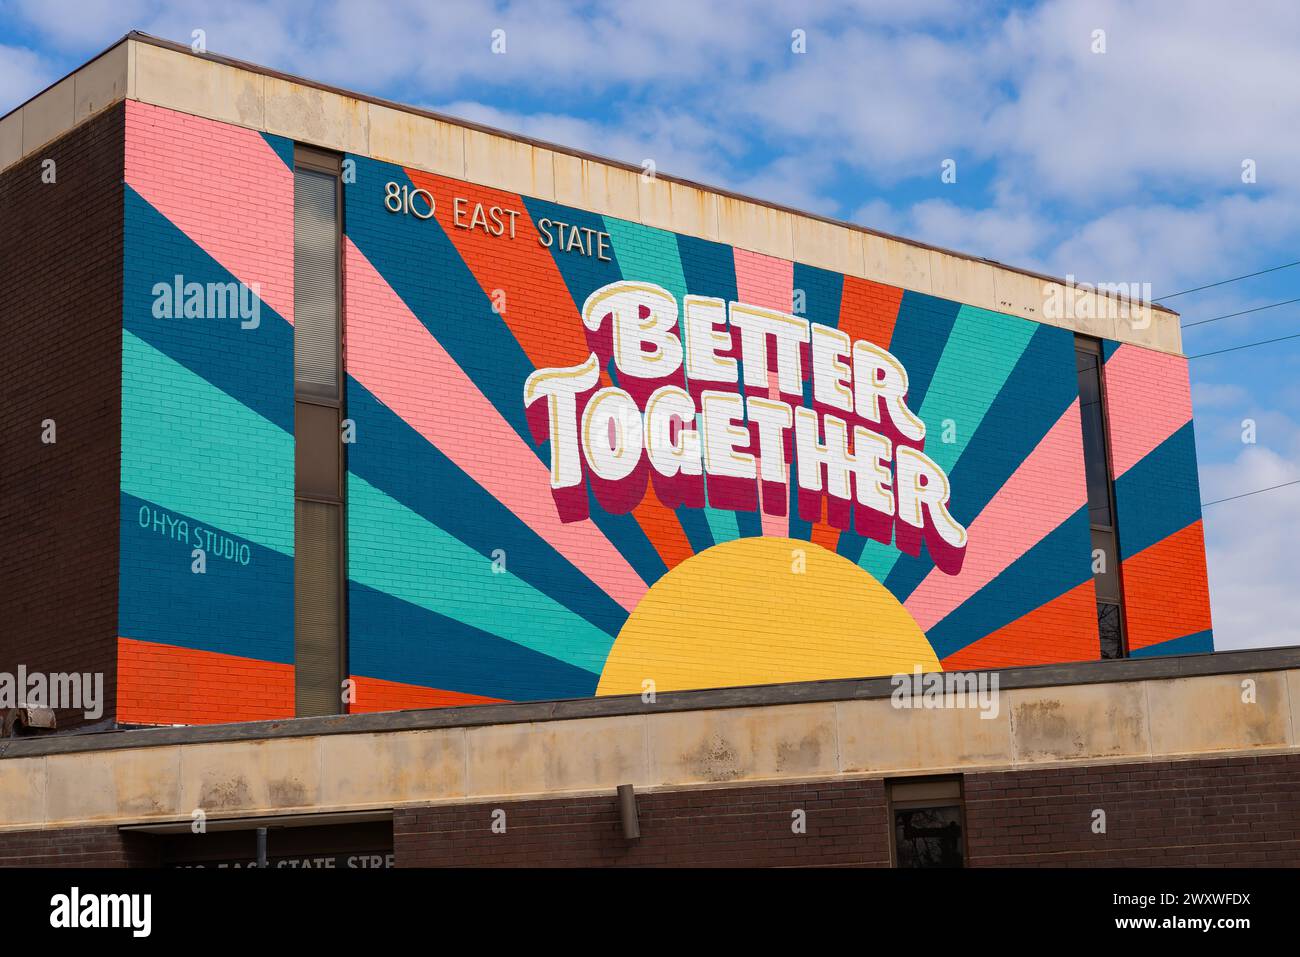 Rockford, Illinois - United States - March 28th, 2024: Downtown mural "Better Together" by artists OhYa Studio-Ray Mawst and Brian Kehoe, painted in 2 Stock Photo